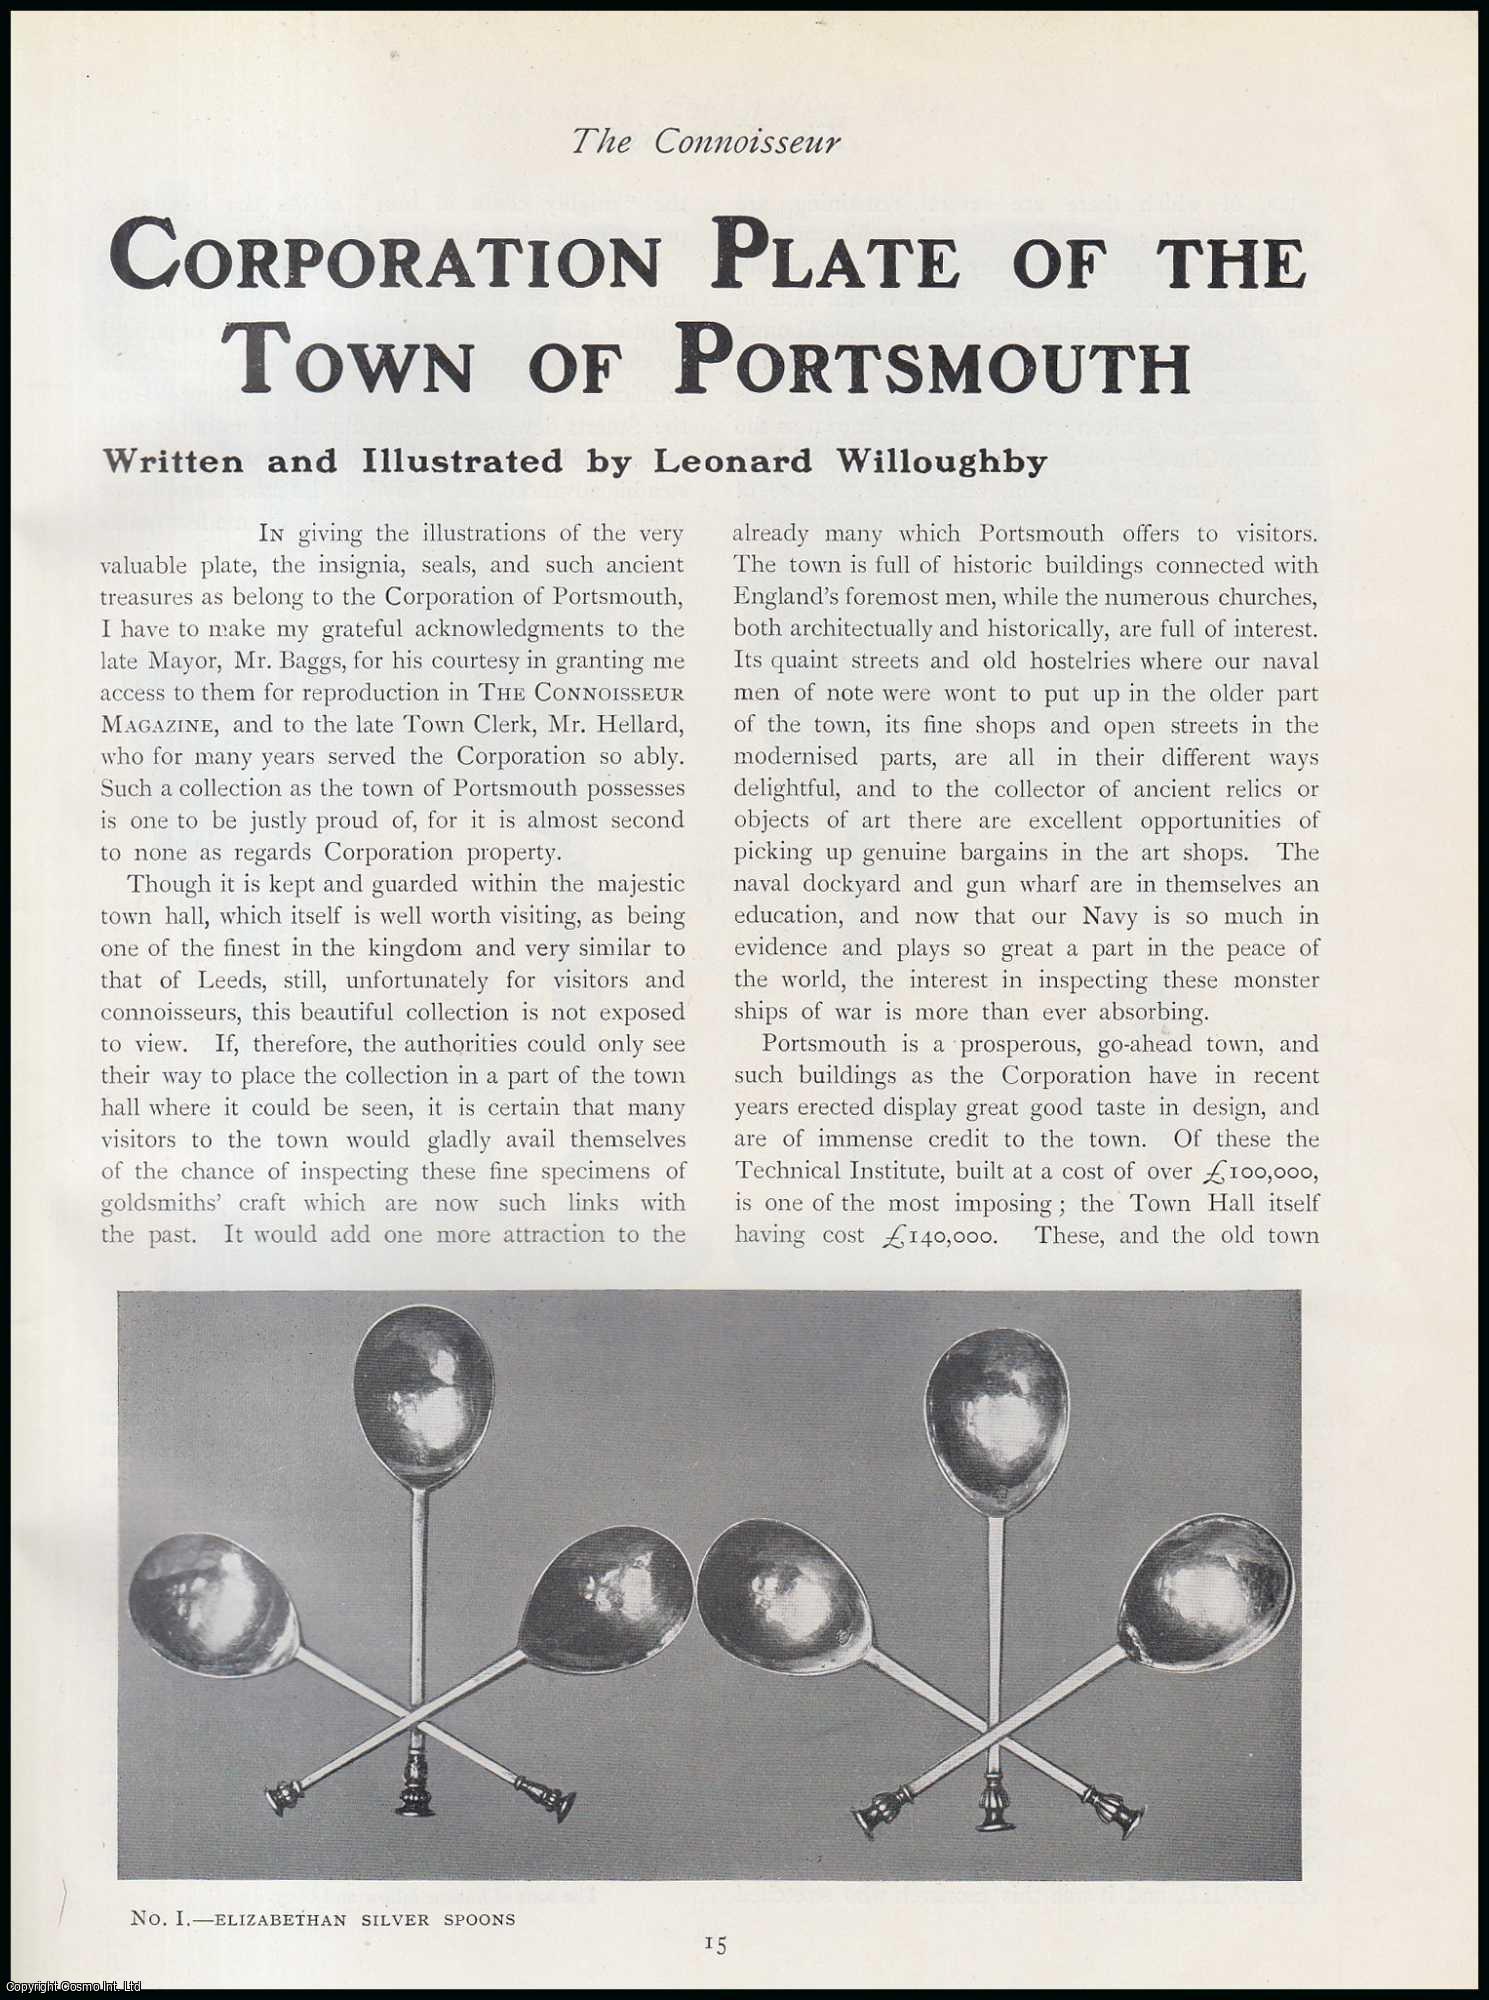 Leonard Willoughby - The Corporation Plate of The Town of Portsmouth. An original article from The Connoisseur, 1910.